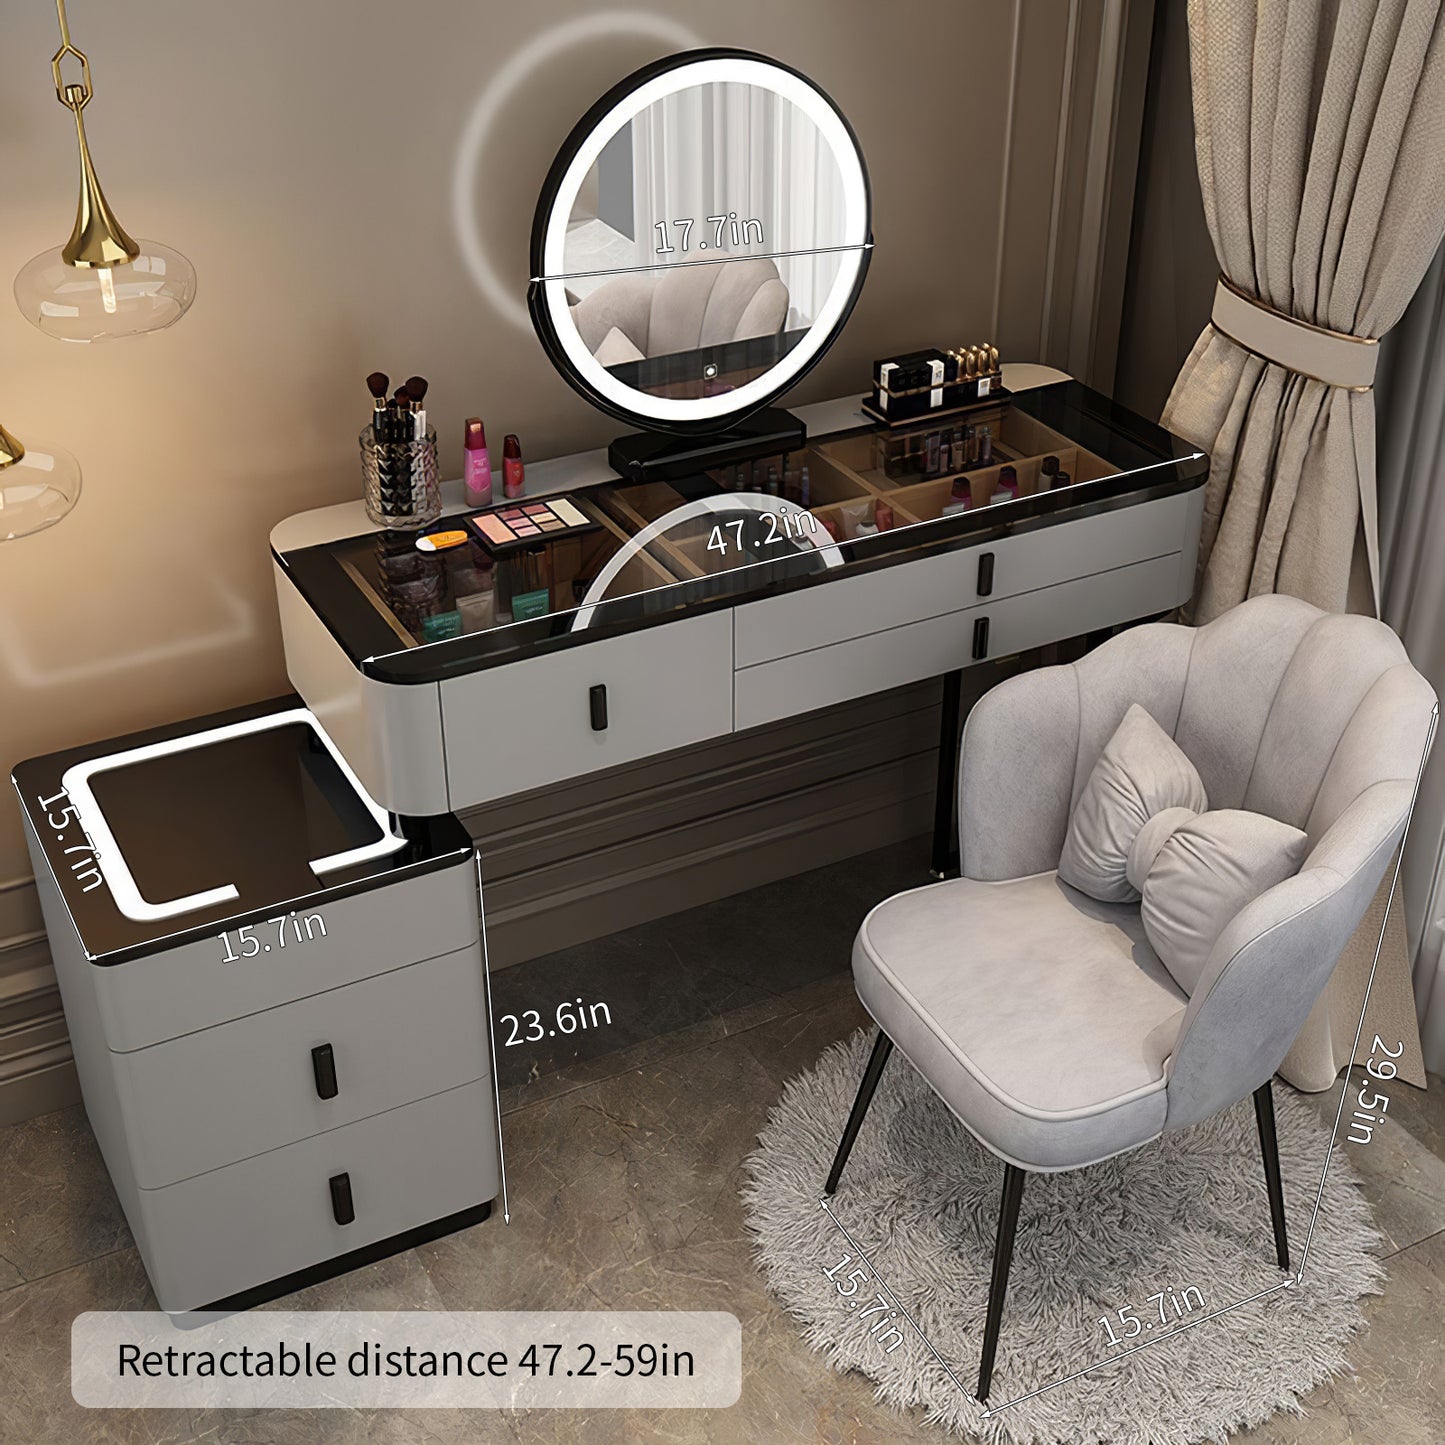 Vanity Set-Makeup Vanity Desk with Lighted Mirror,5 Solid Wood Drawers and Soft Petal Chair